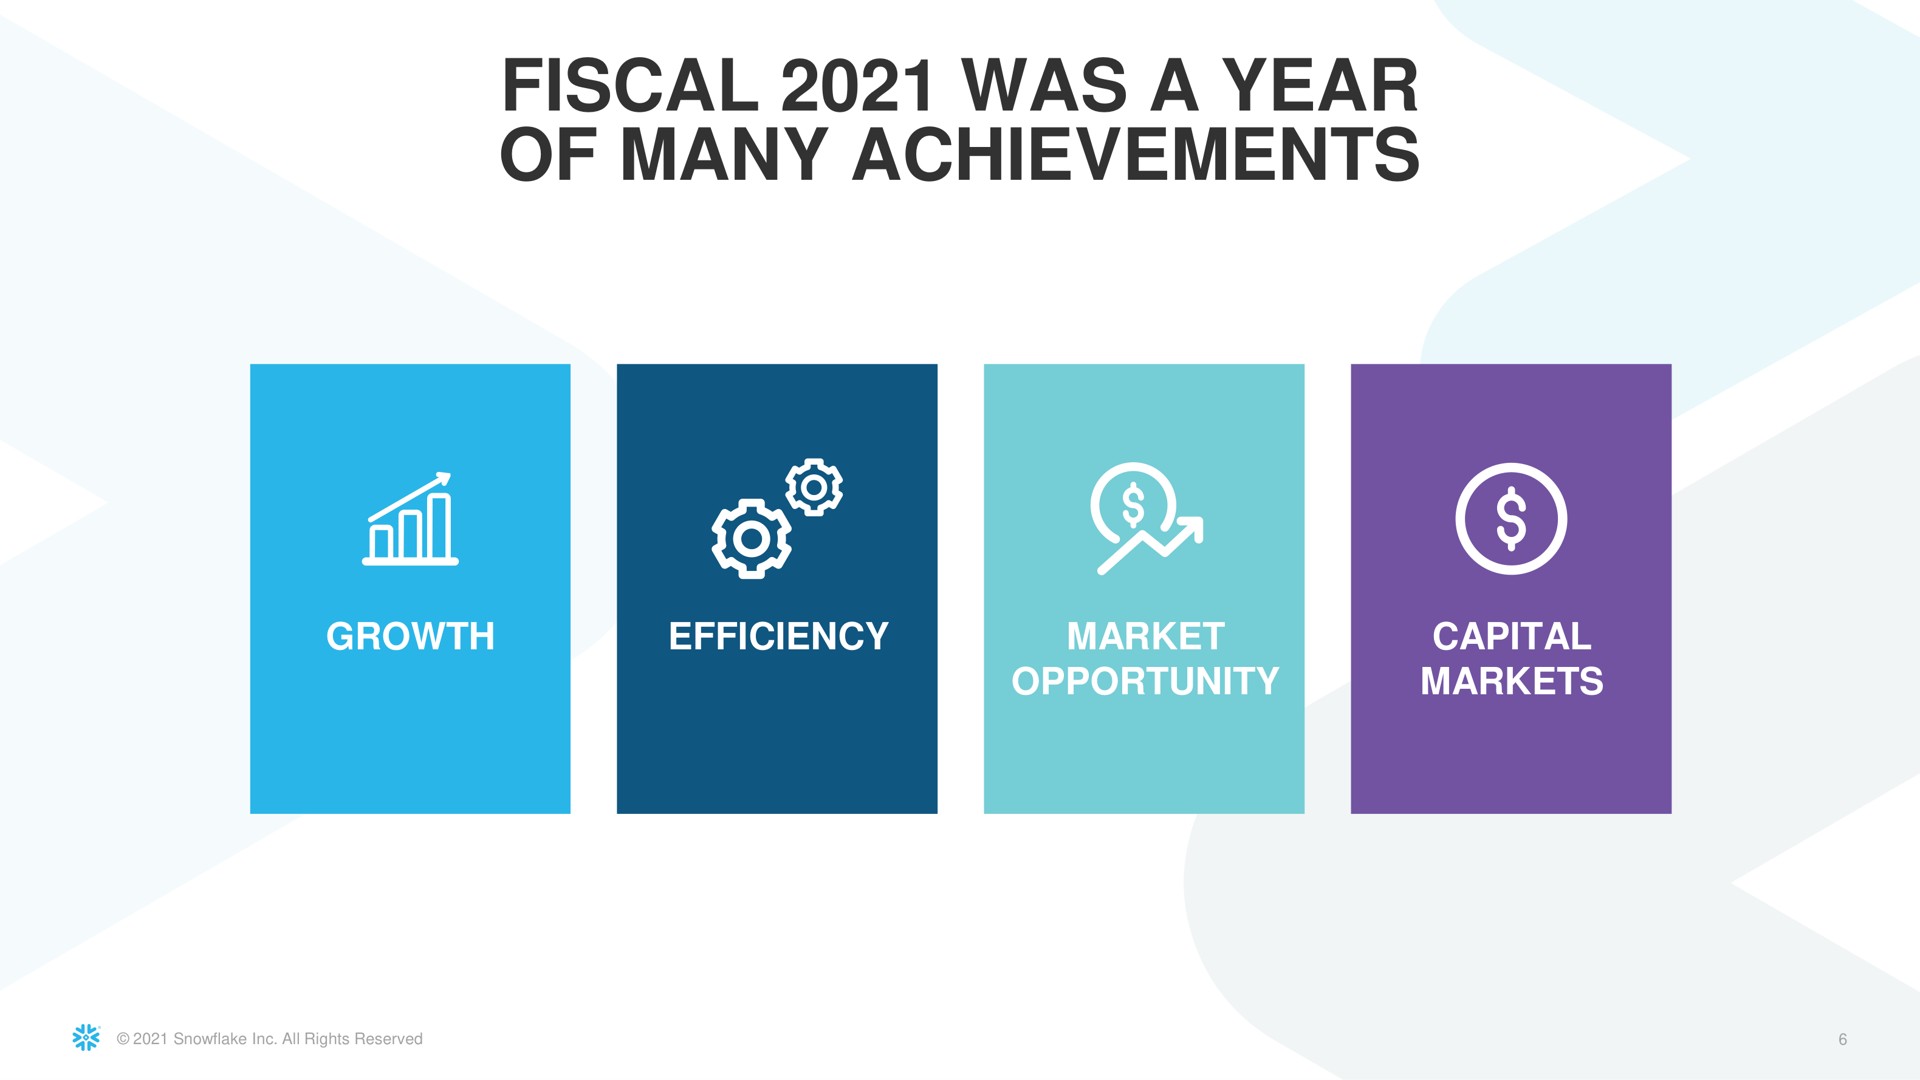 fiscal was a year of many achievements | Snowflake